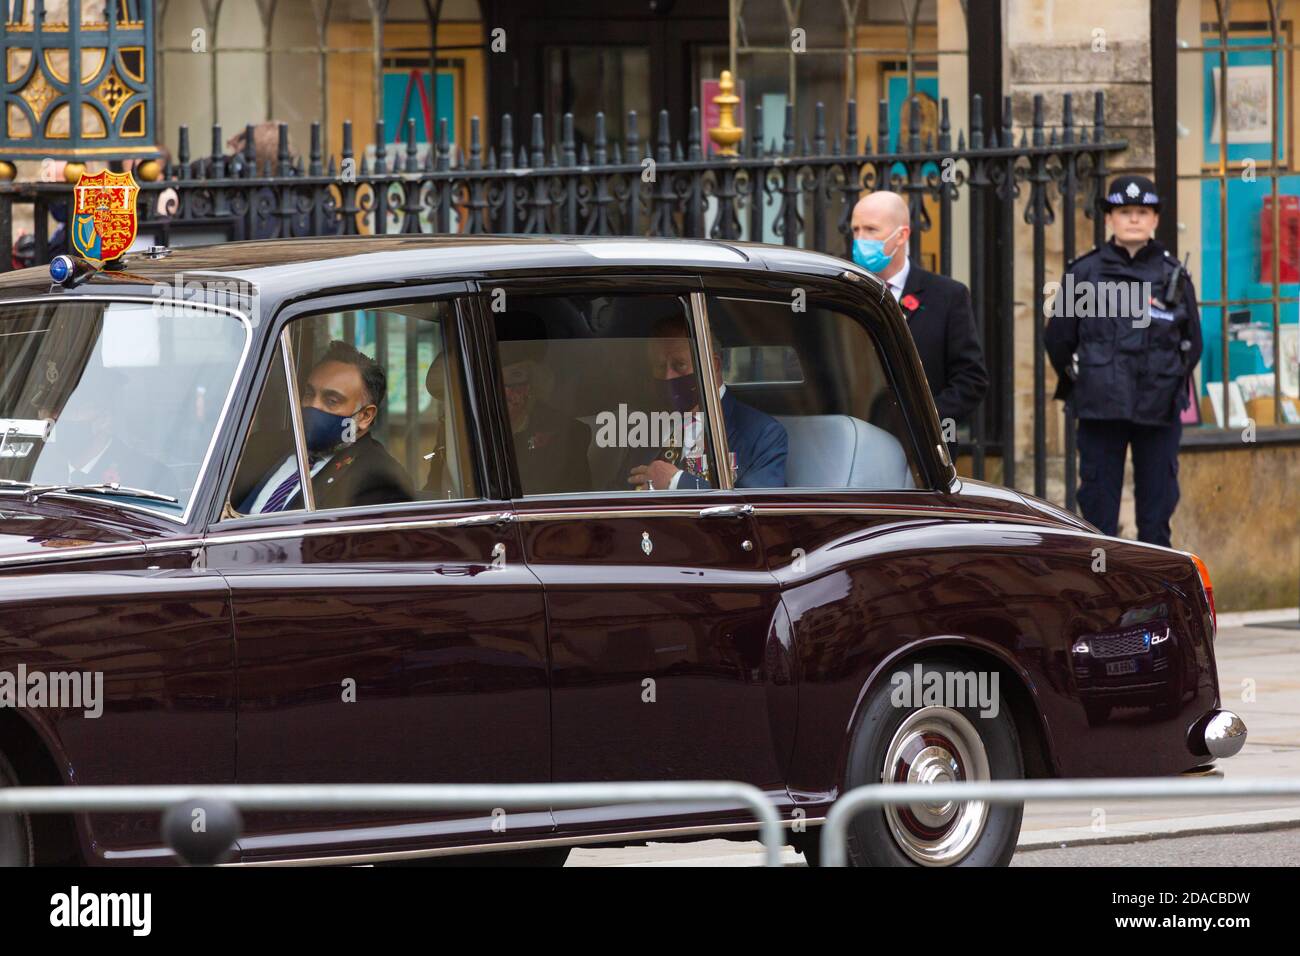 HRH Prince Charles and Camilla Parker Bowles leave Westminster Abbey by car after the Remembrance day ceremony 11-11-2020 London, uk Stock Photo